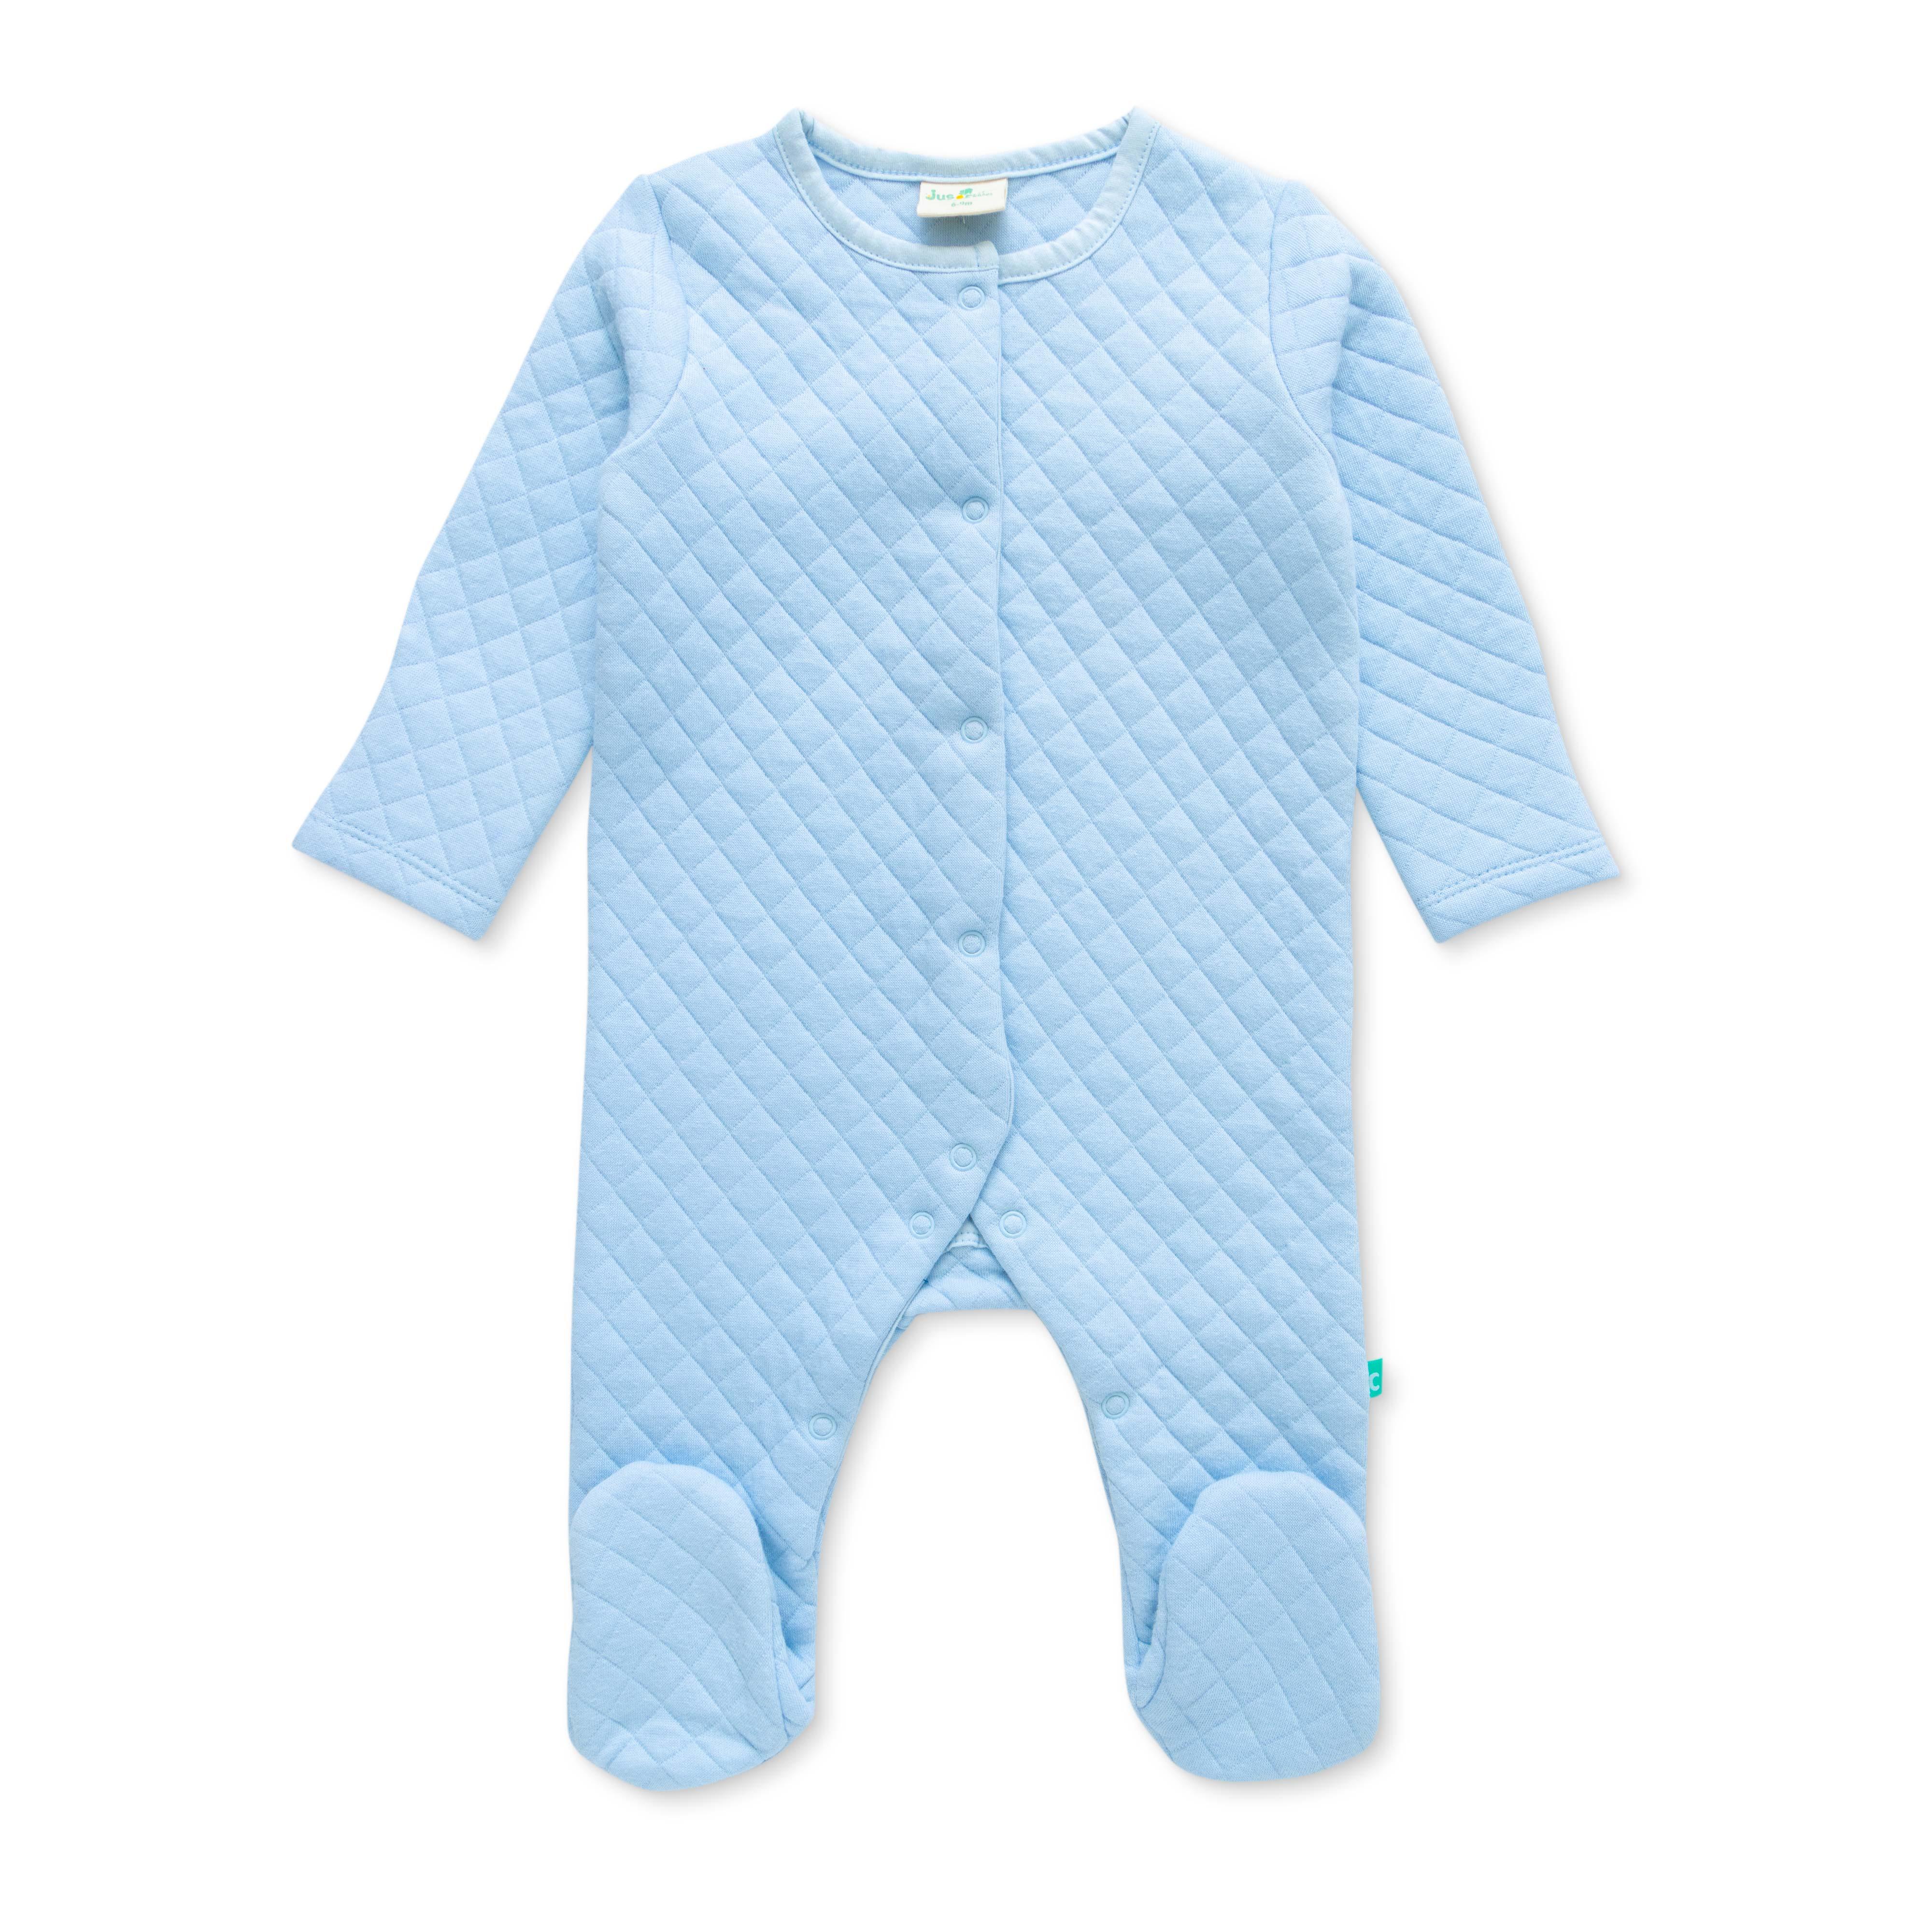 Boys Quilted Fabric Solid Blue Full Sleeve SleepSuit - Juscubs